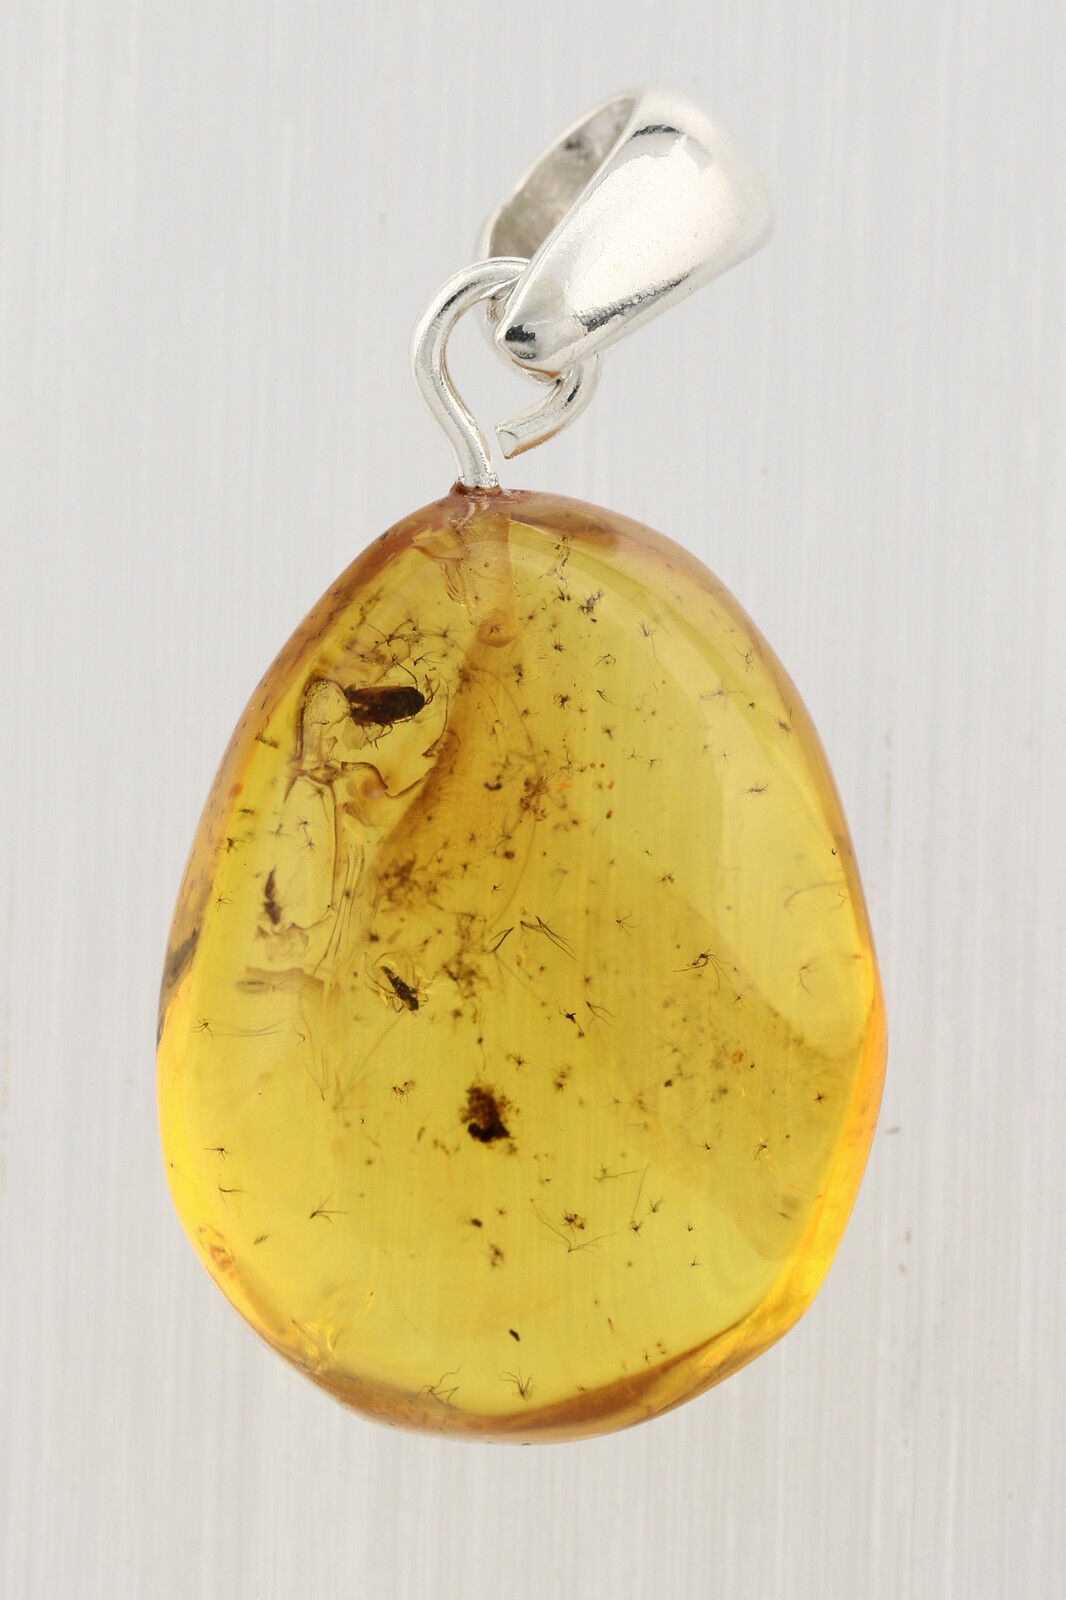 BEETLE MIDGE PARASITIC WASP Inclusions BALTIC AMBER SIVER Pendant 2.2g p51013-19